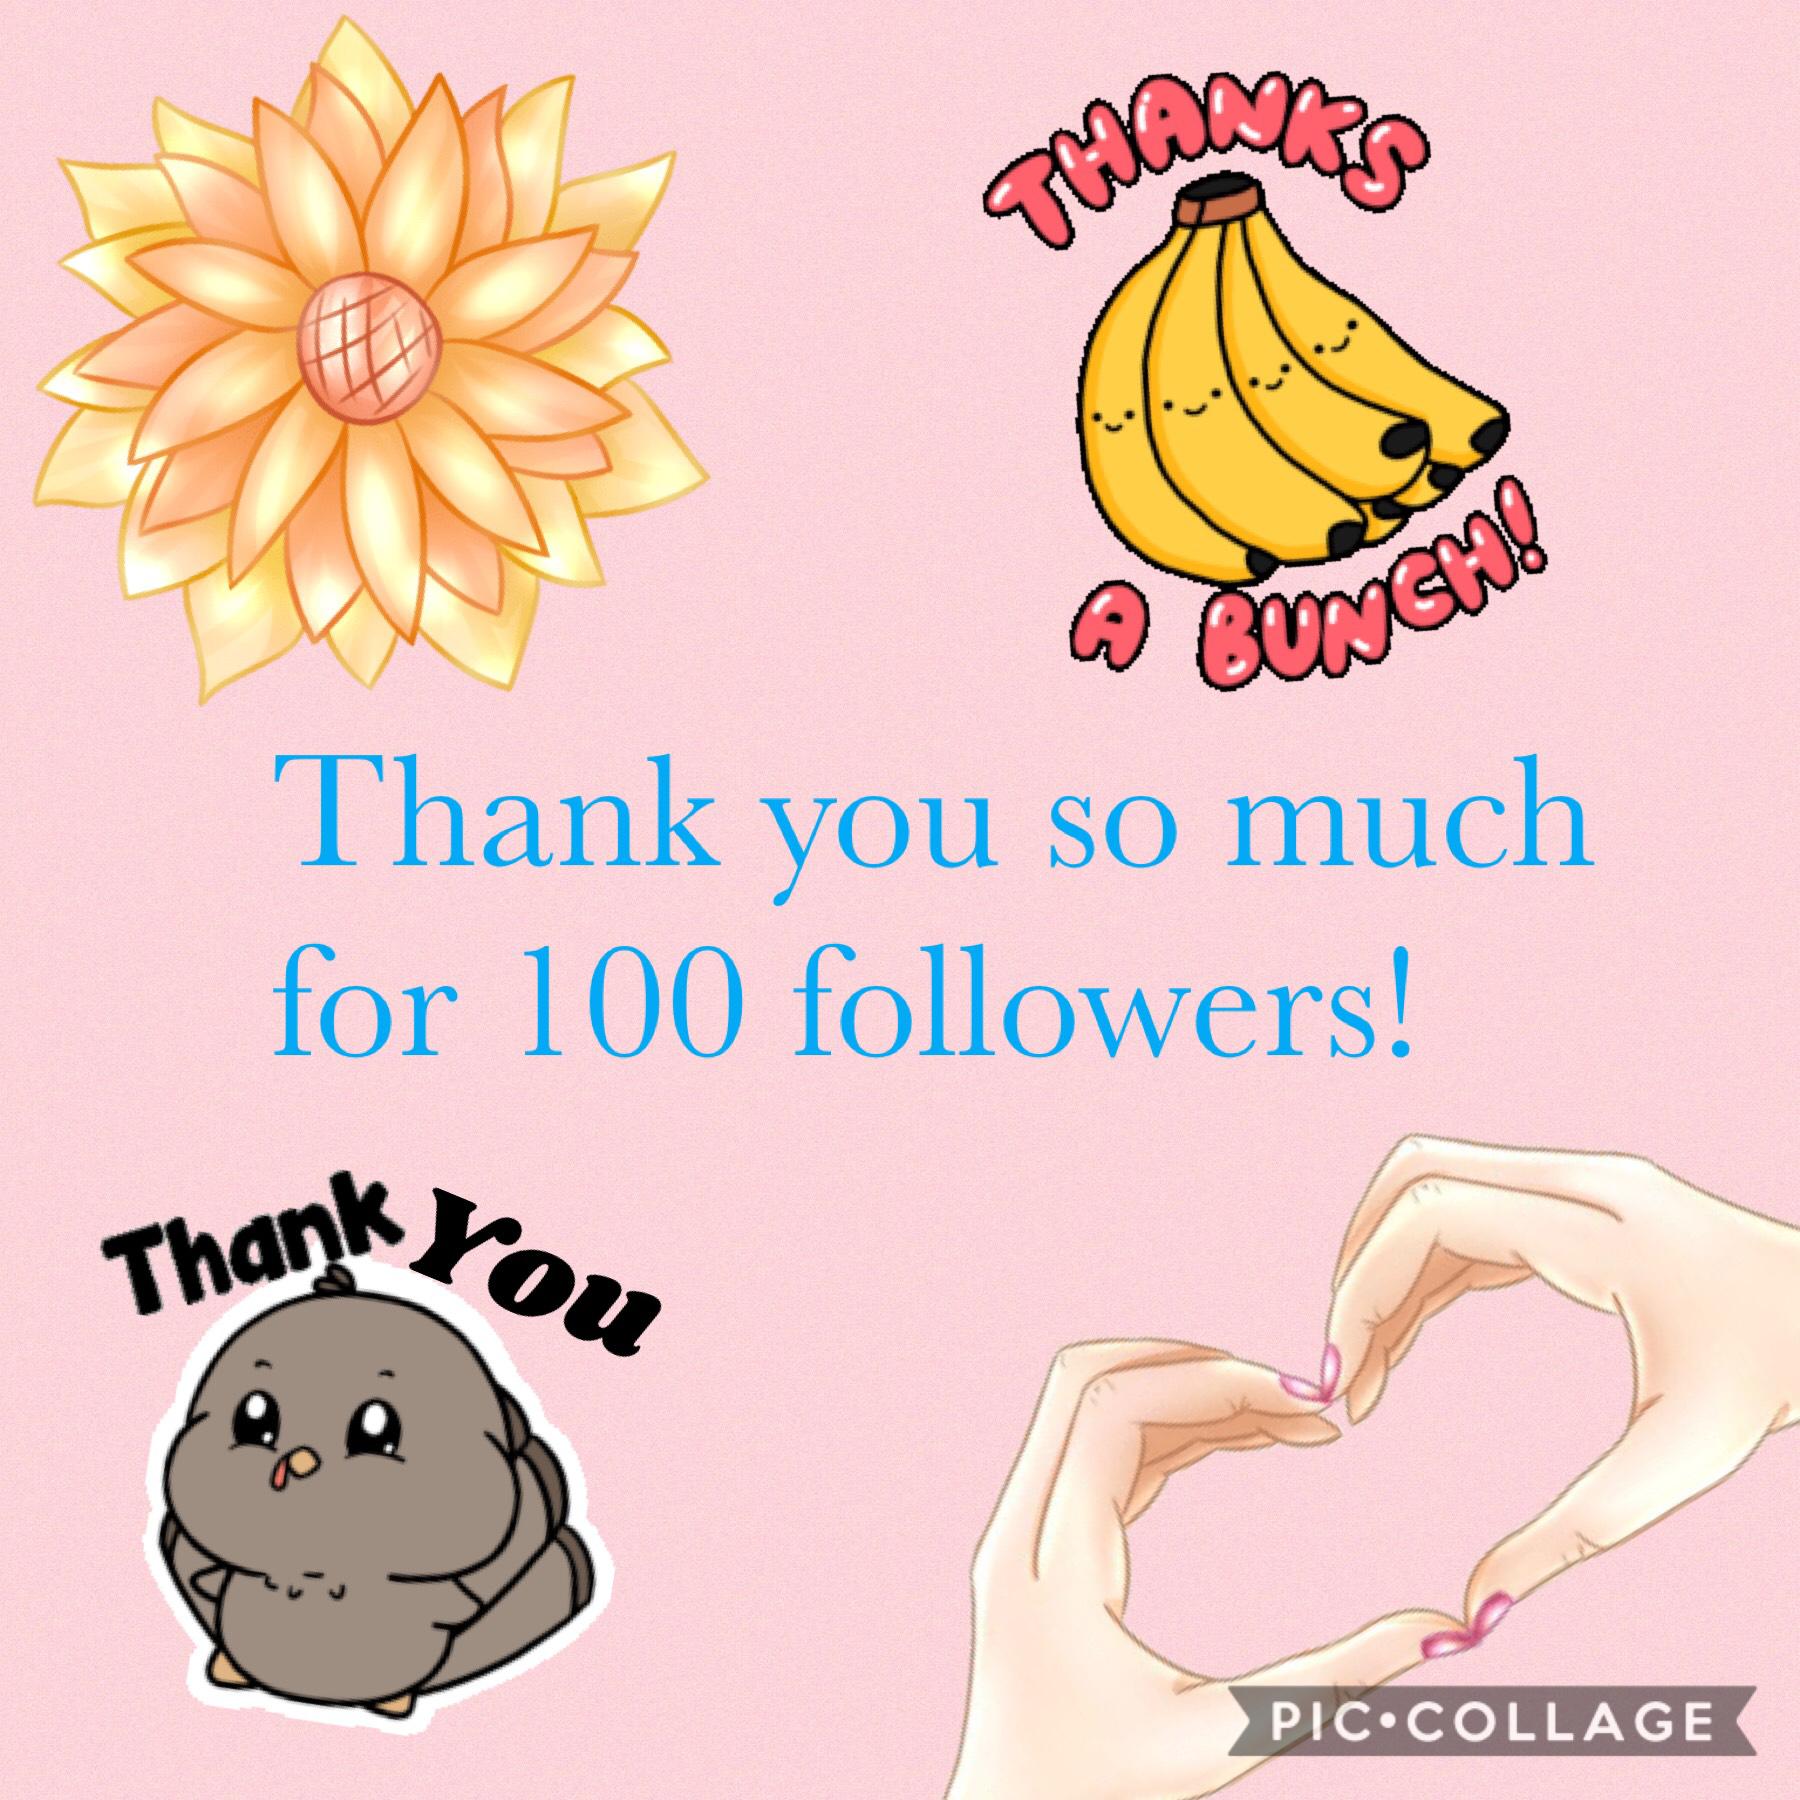 Thank you all so much! 🍕🍔🍭